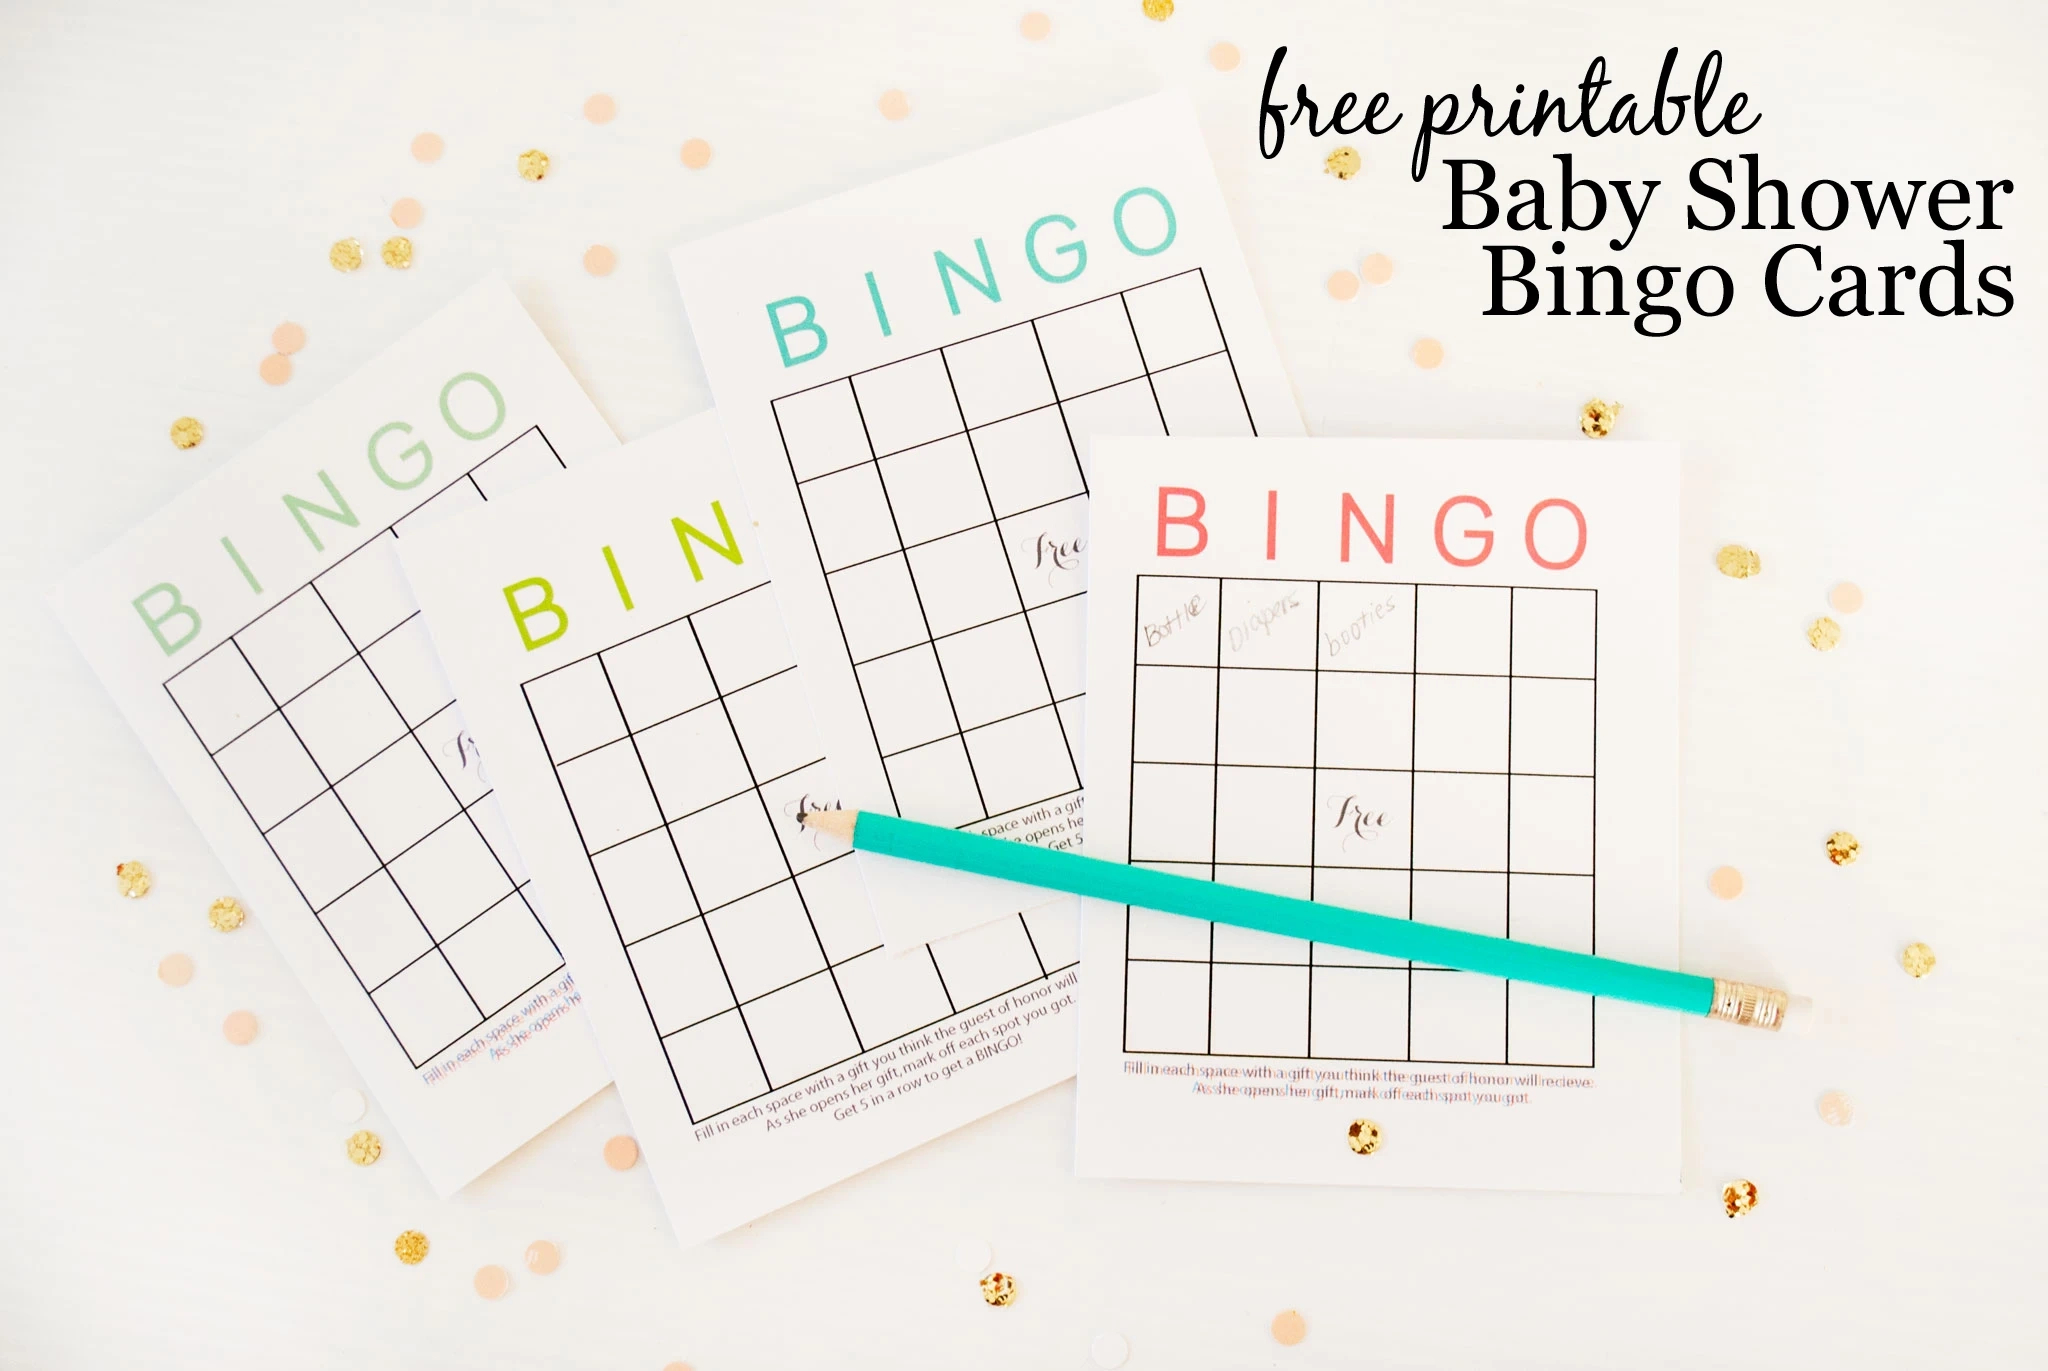 Free Printable Baby Shower Bingo Cards - Project Nursery within Free Printable Baby Shower Bingo